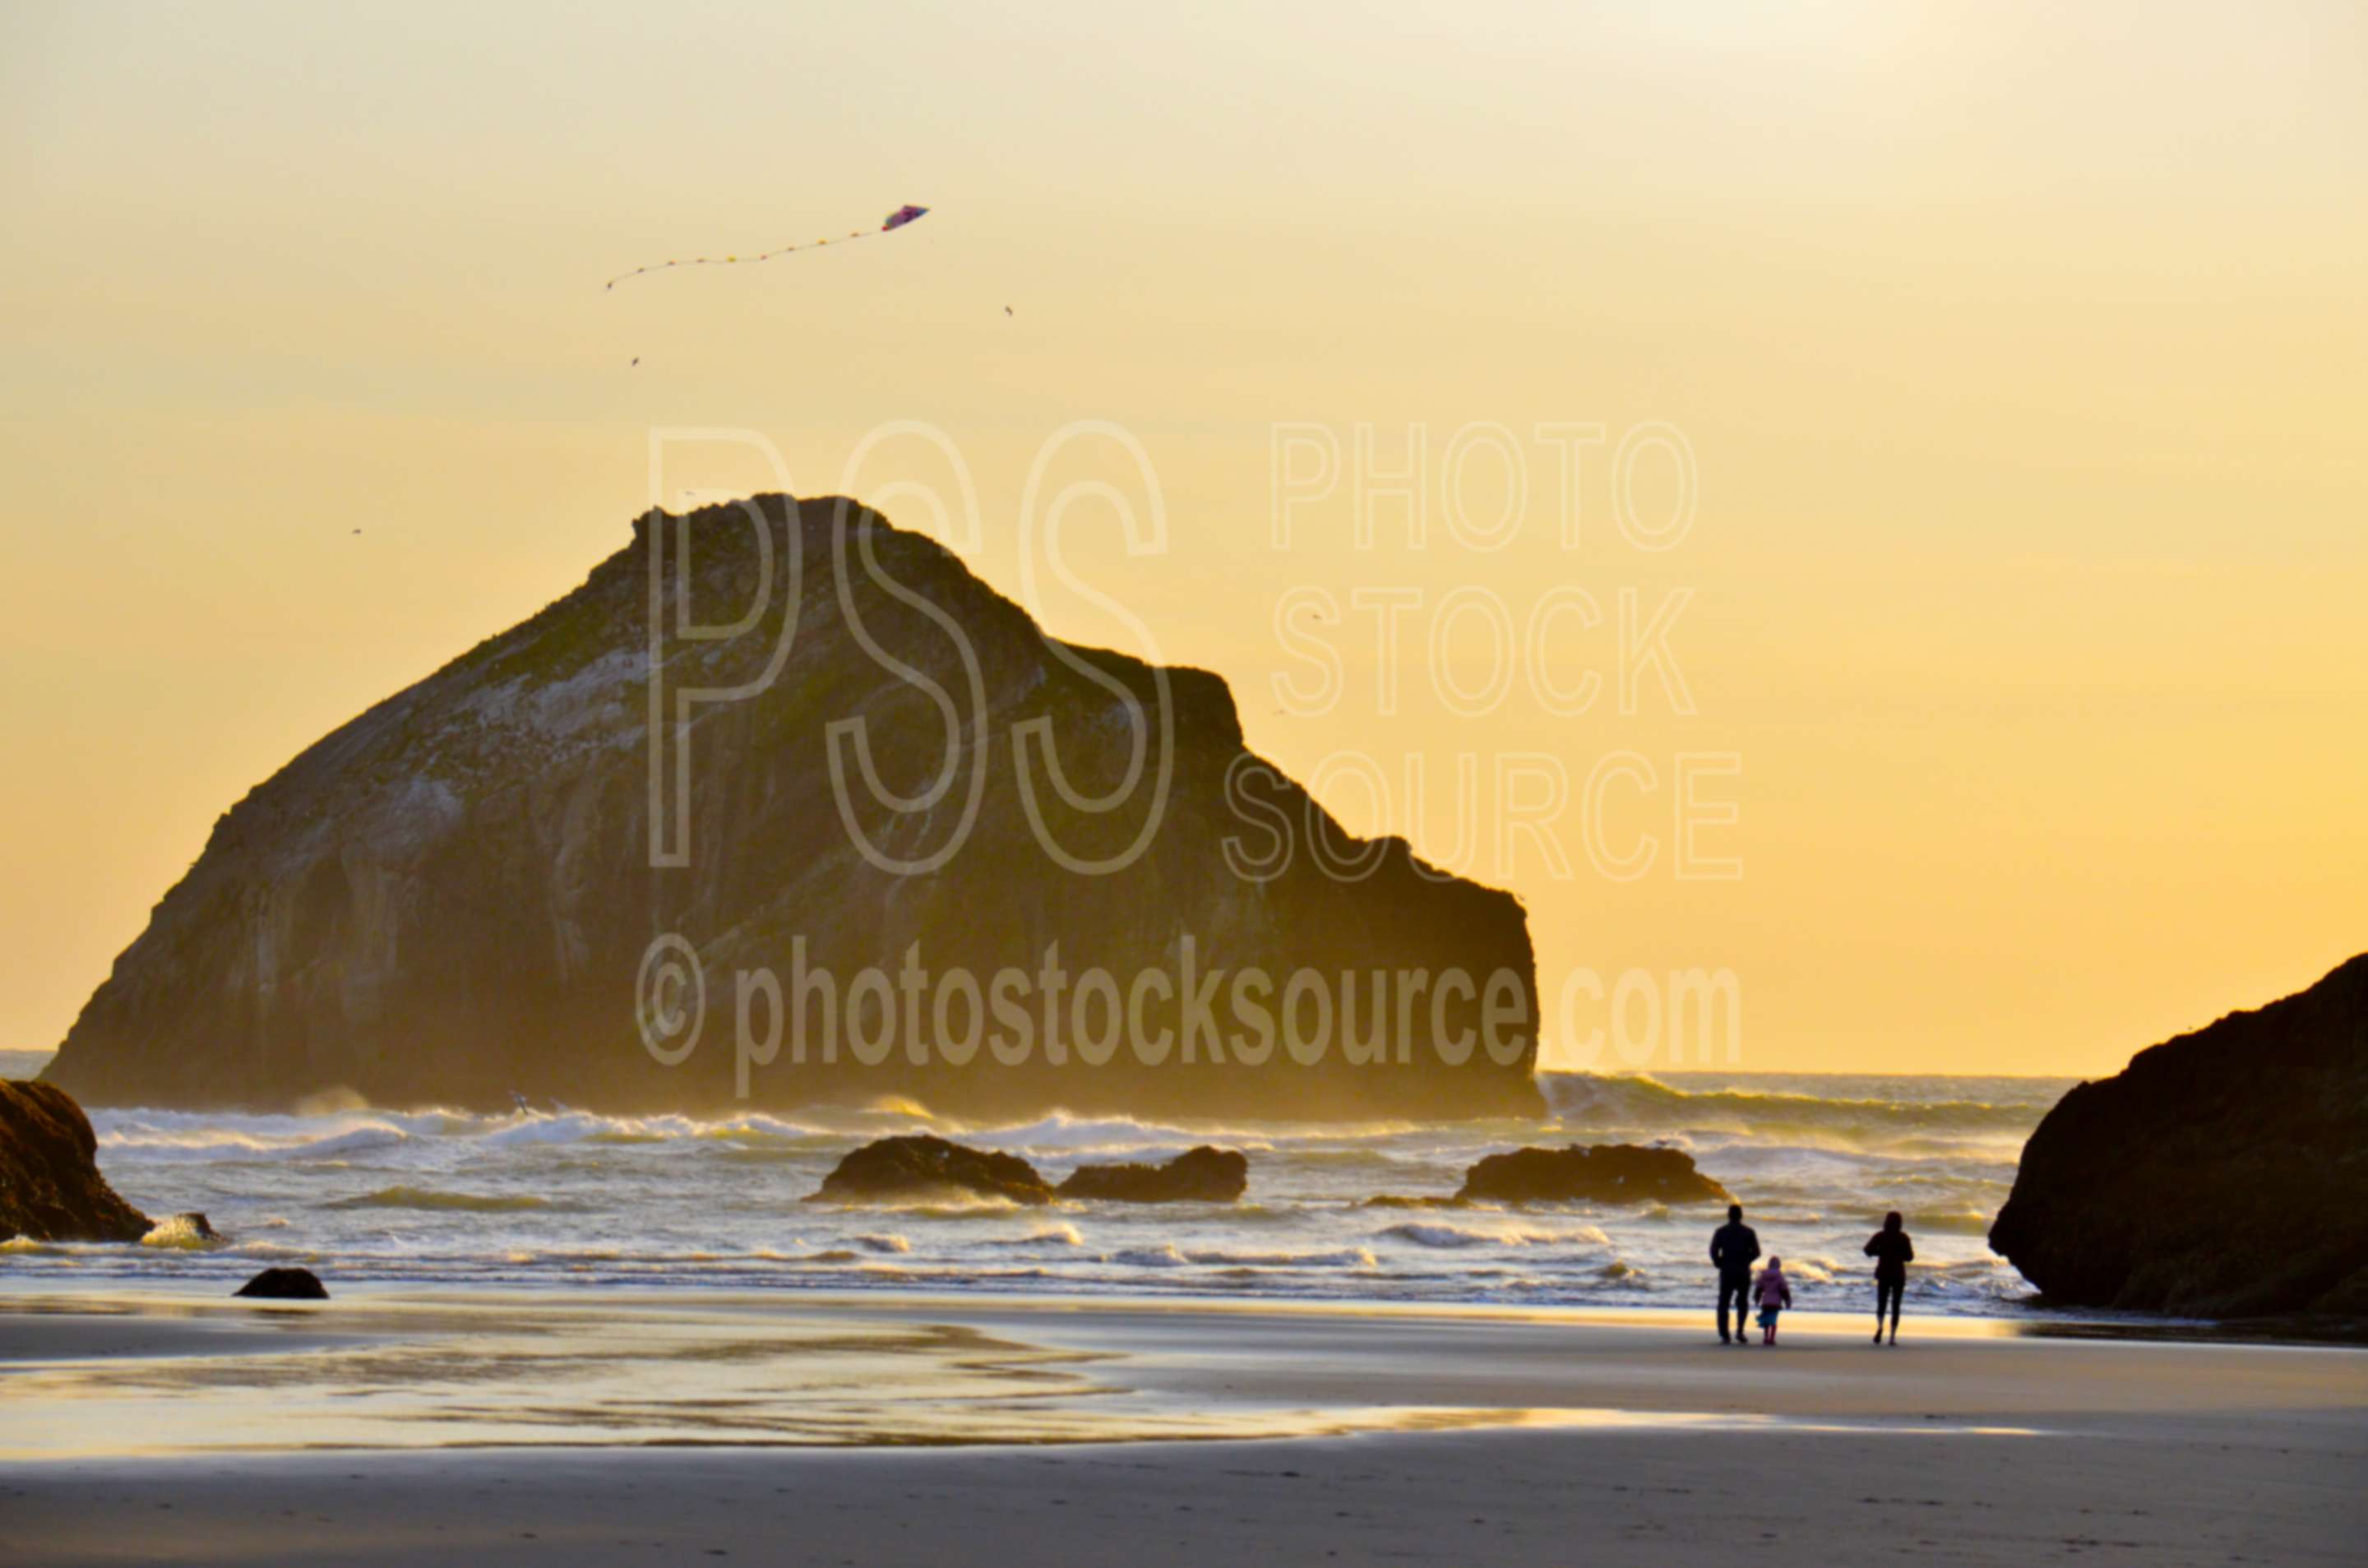 Flying Kite at Face Rock,beach,kite,flying,family,people,playing,rocks,sunset,face rock